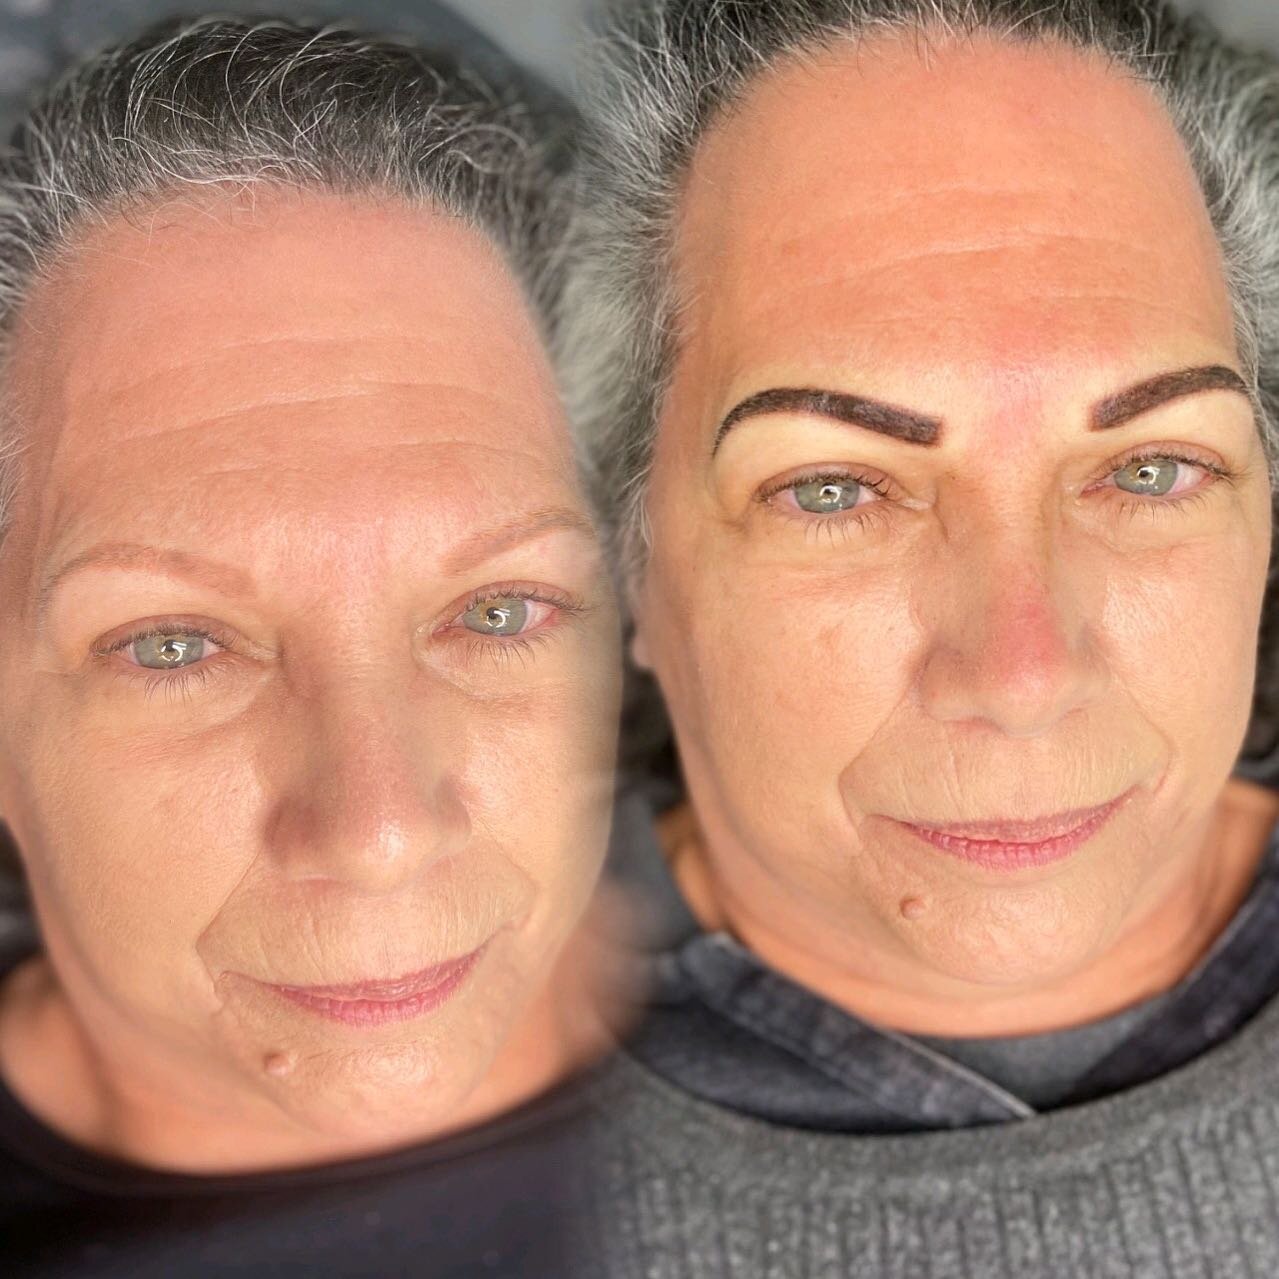 Powder Brow Cover Up from previous work done years ago (not done by me). They will fade to a lighter softer look. 

Dm,Text, Email, or Call the Contact Number in my Bio for More Details, or Book your Free Consultation Appointment Today by Clicking on